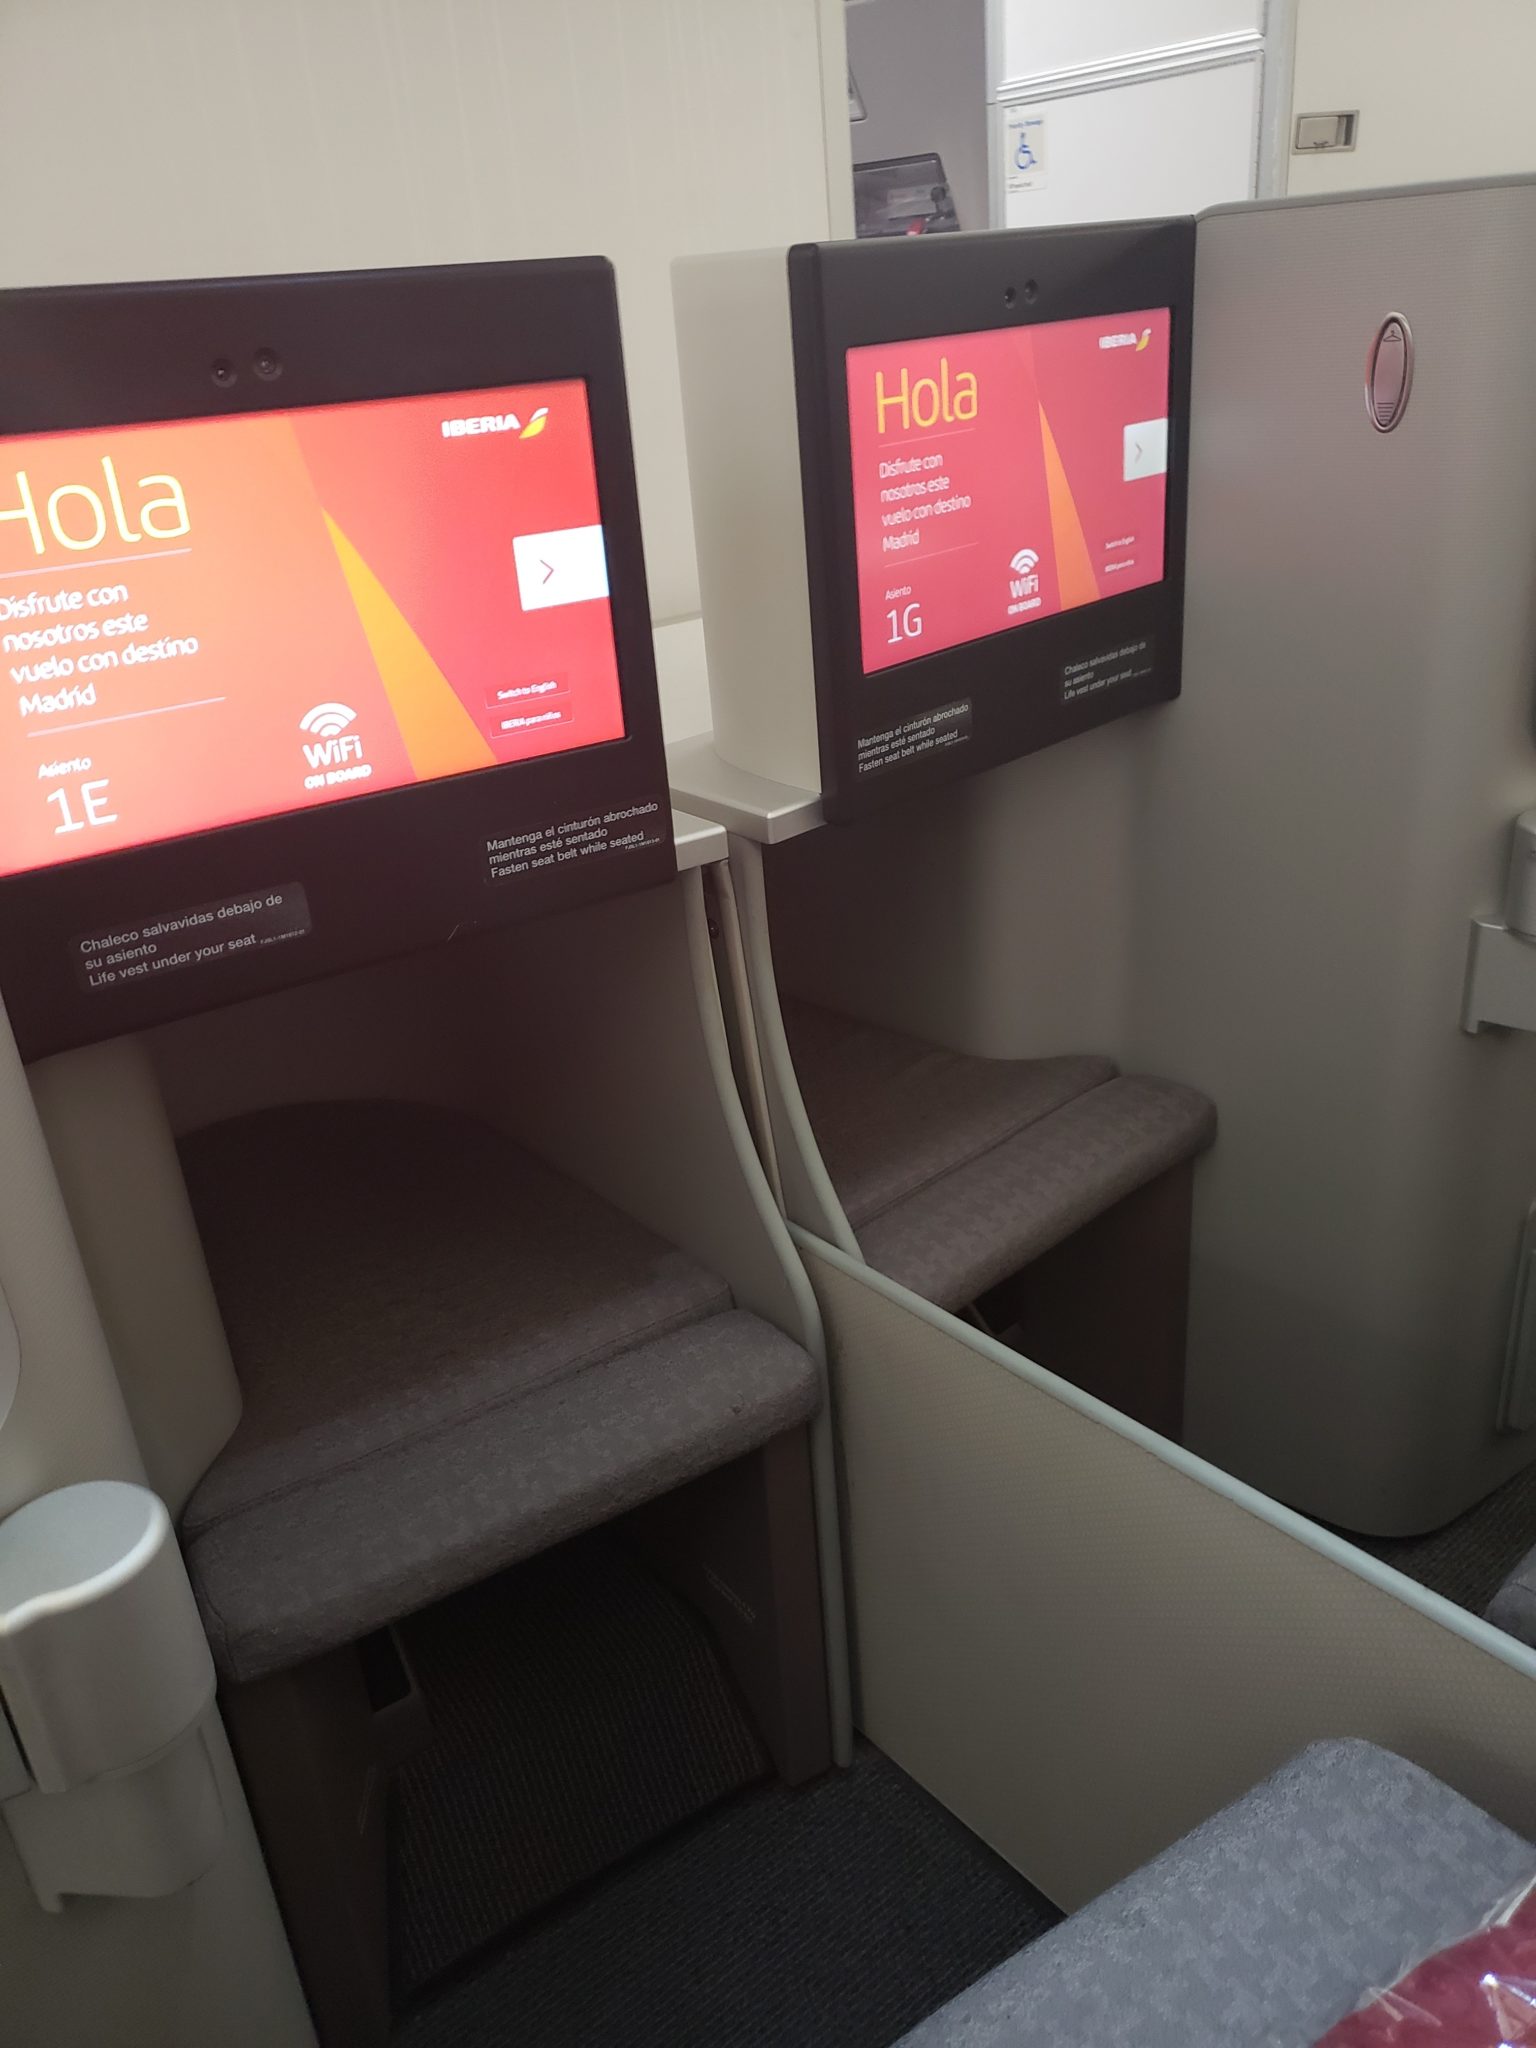 a two monitors on a plane